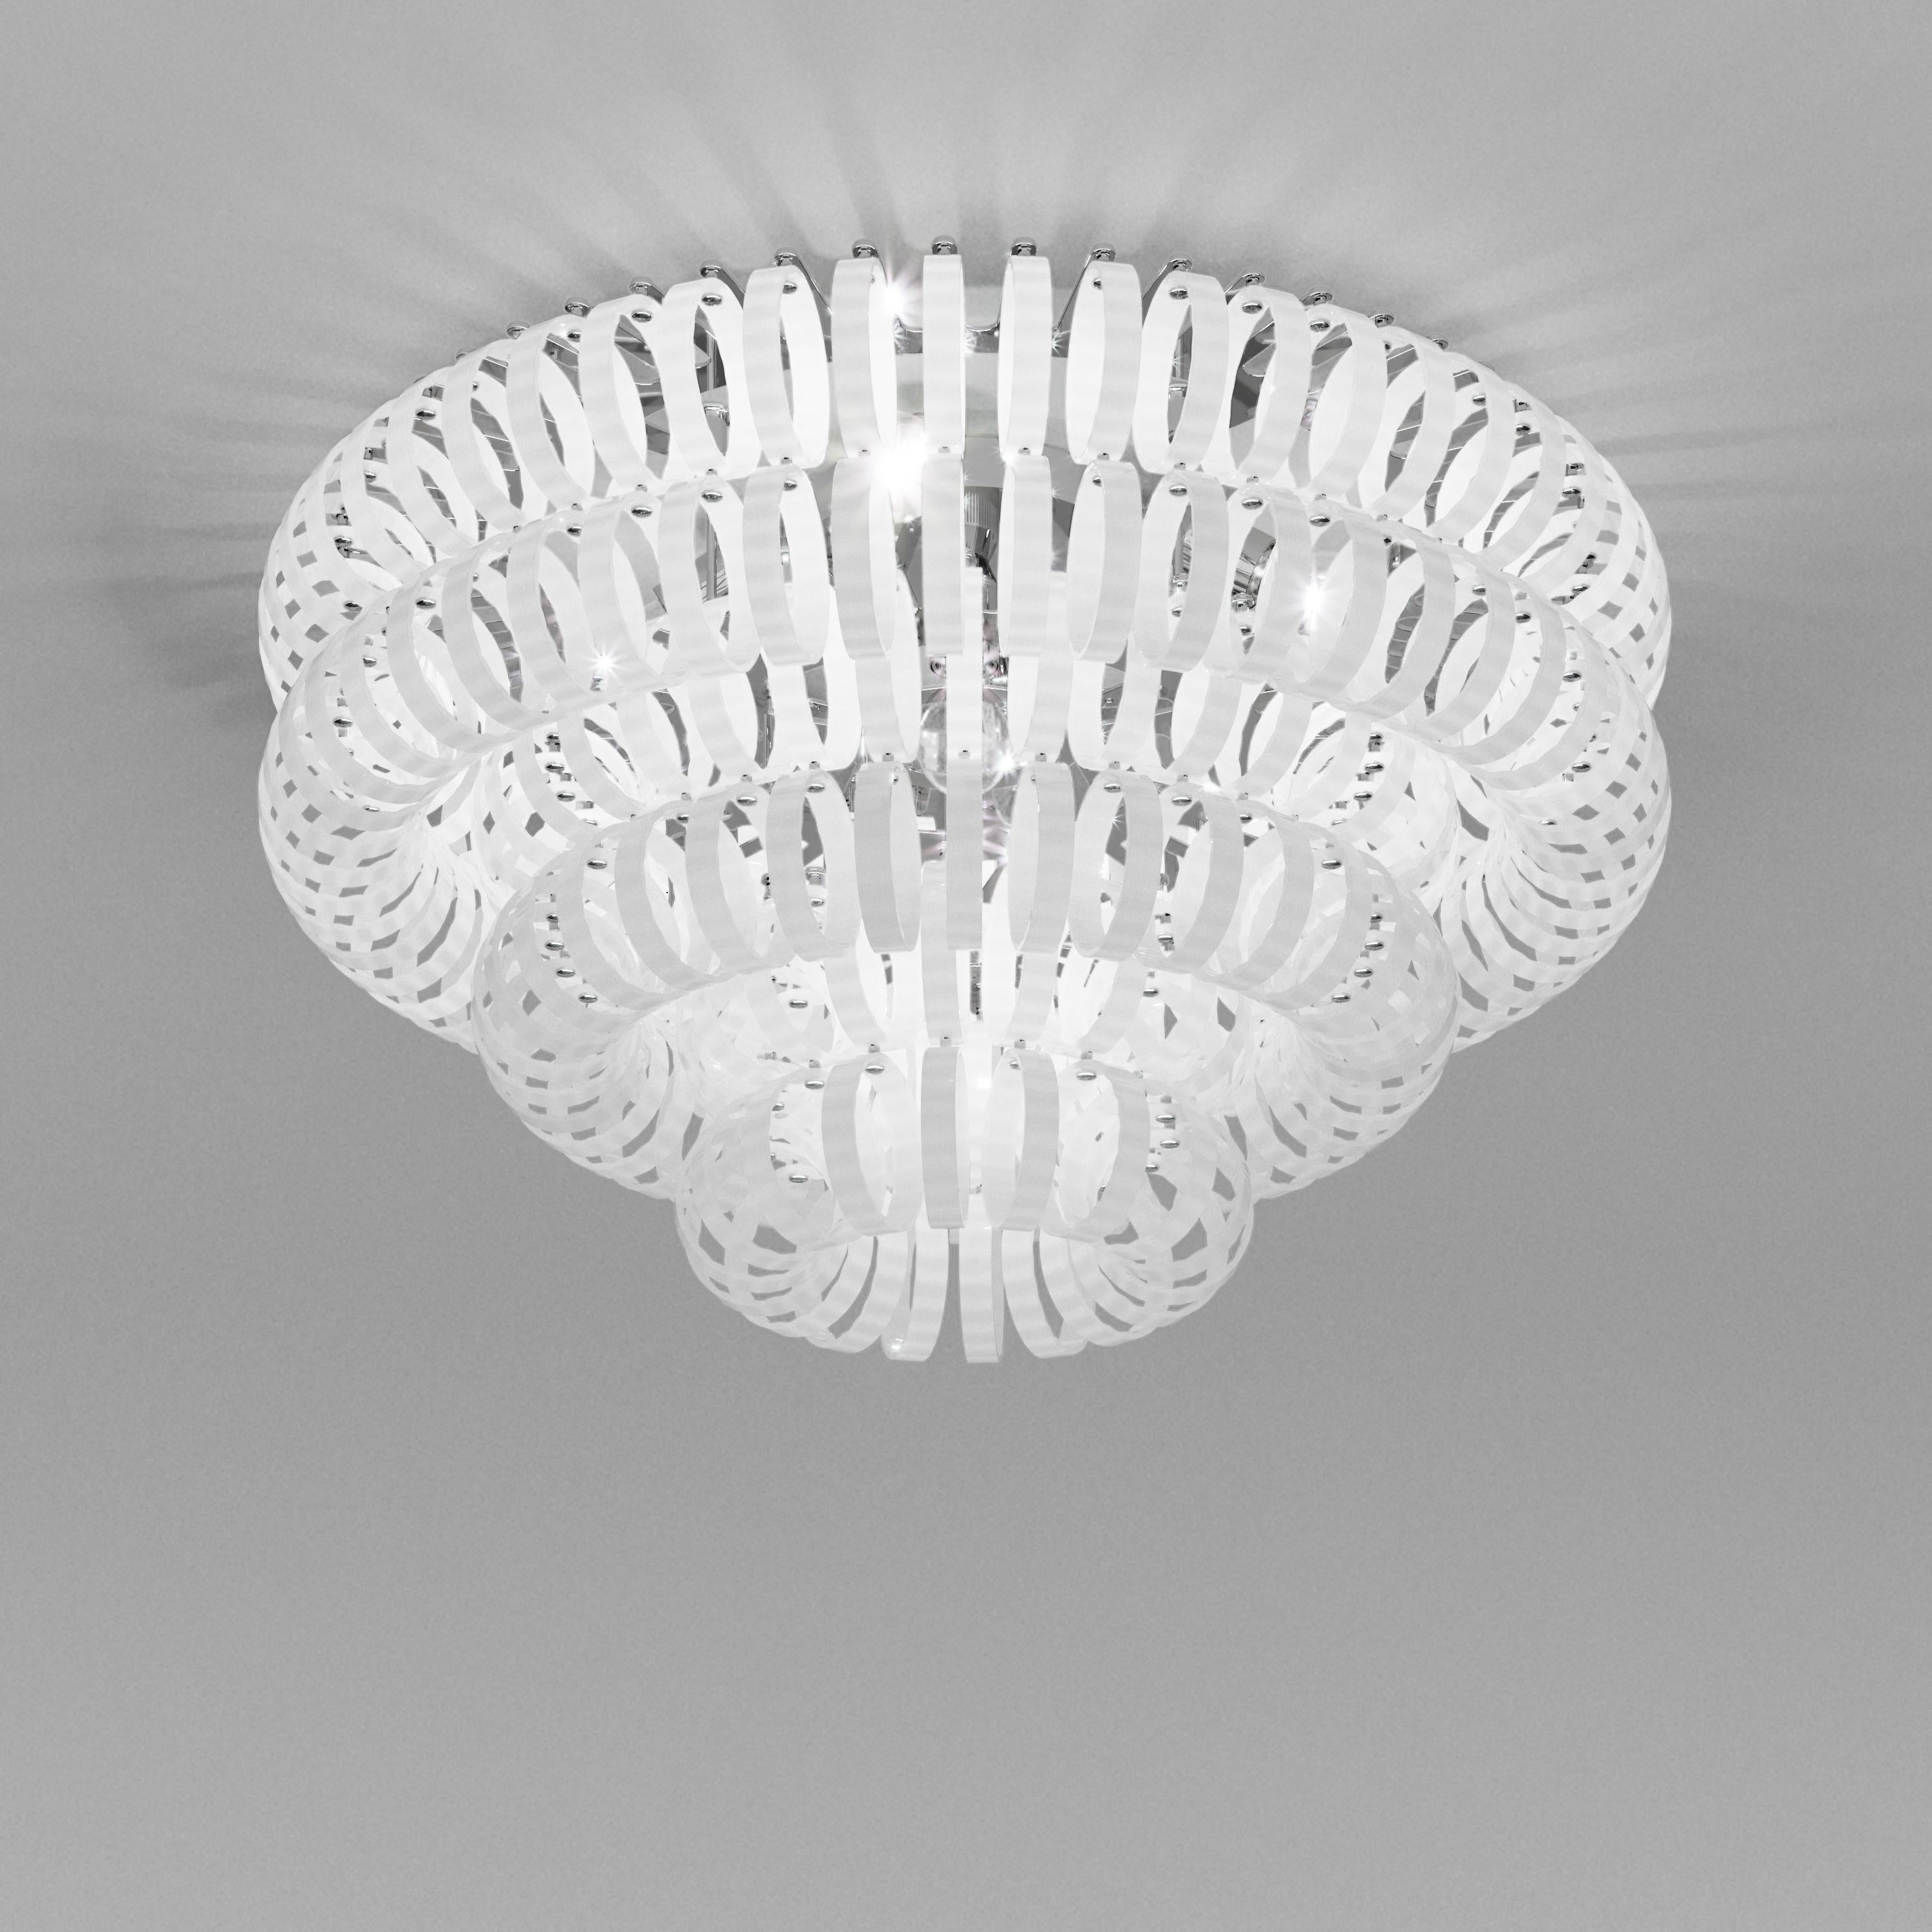 For Sale: White (White and Striped Glass) Ecos PL 90 Ceiling Light with Chrome Frame by Vistosi 2